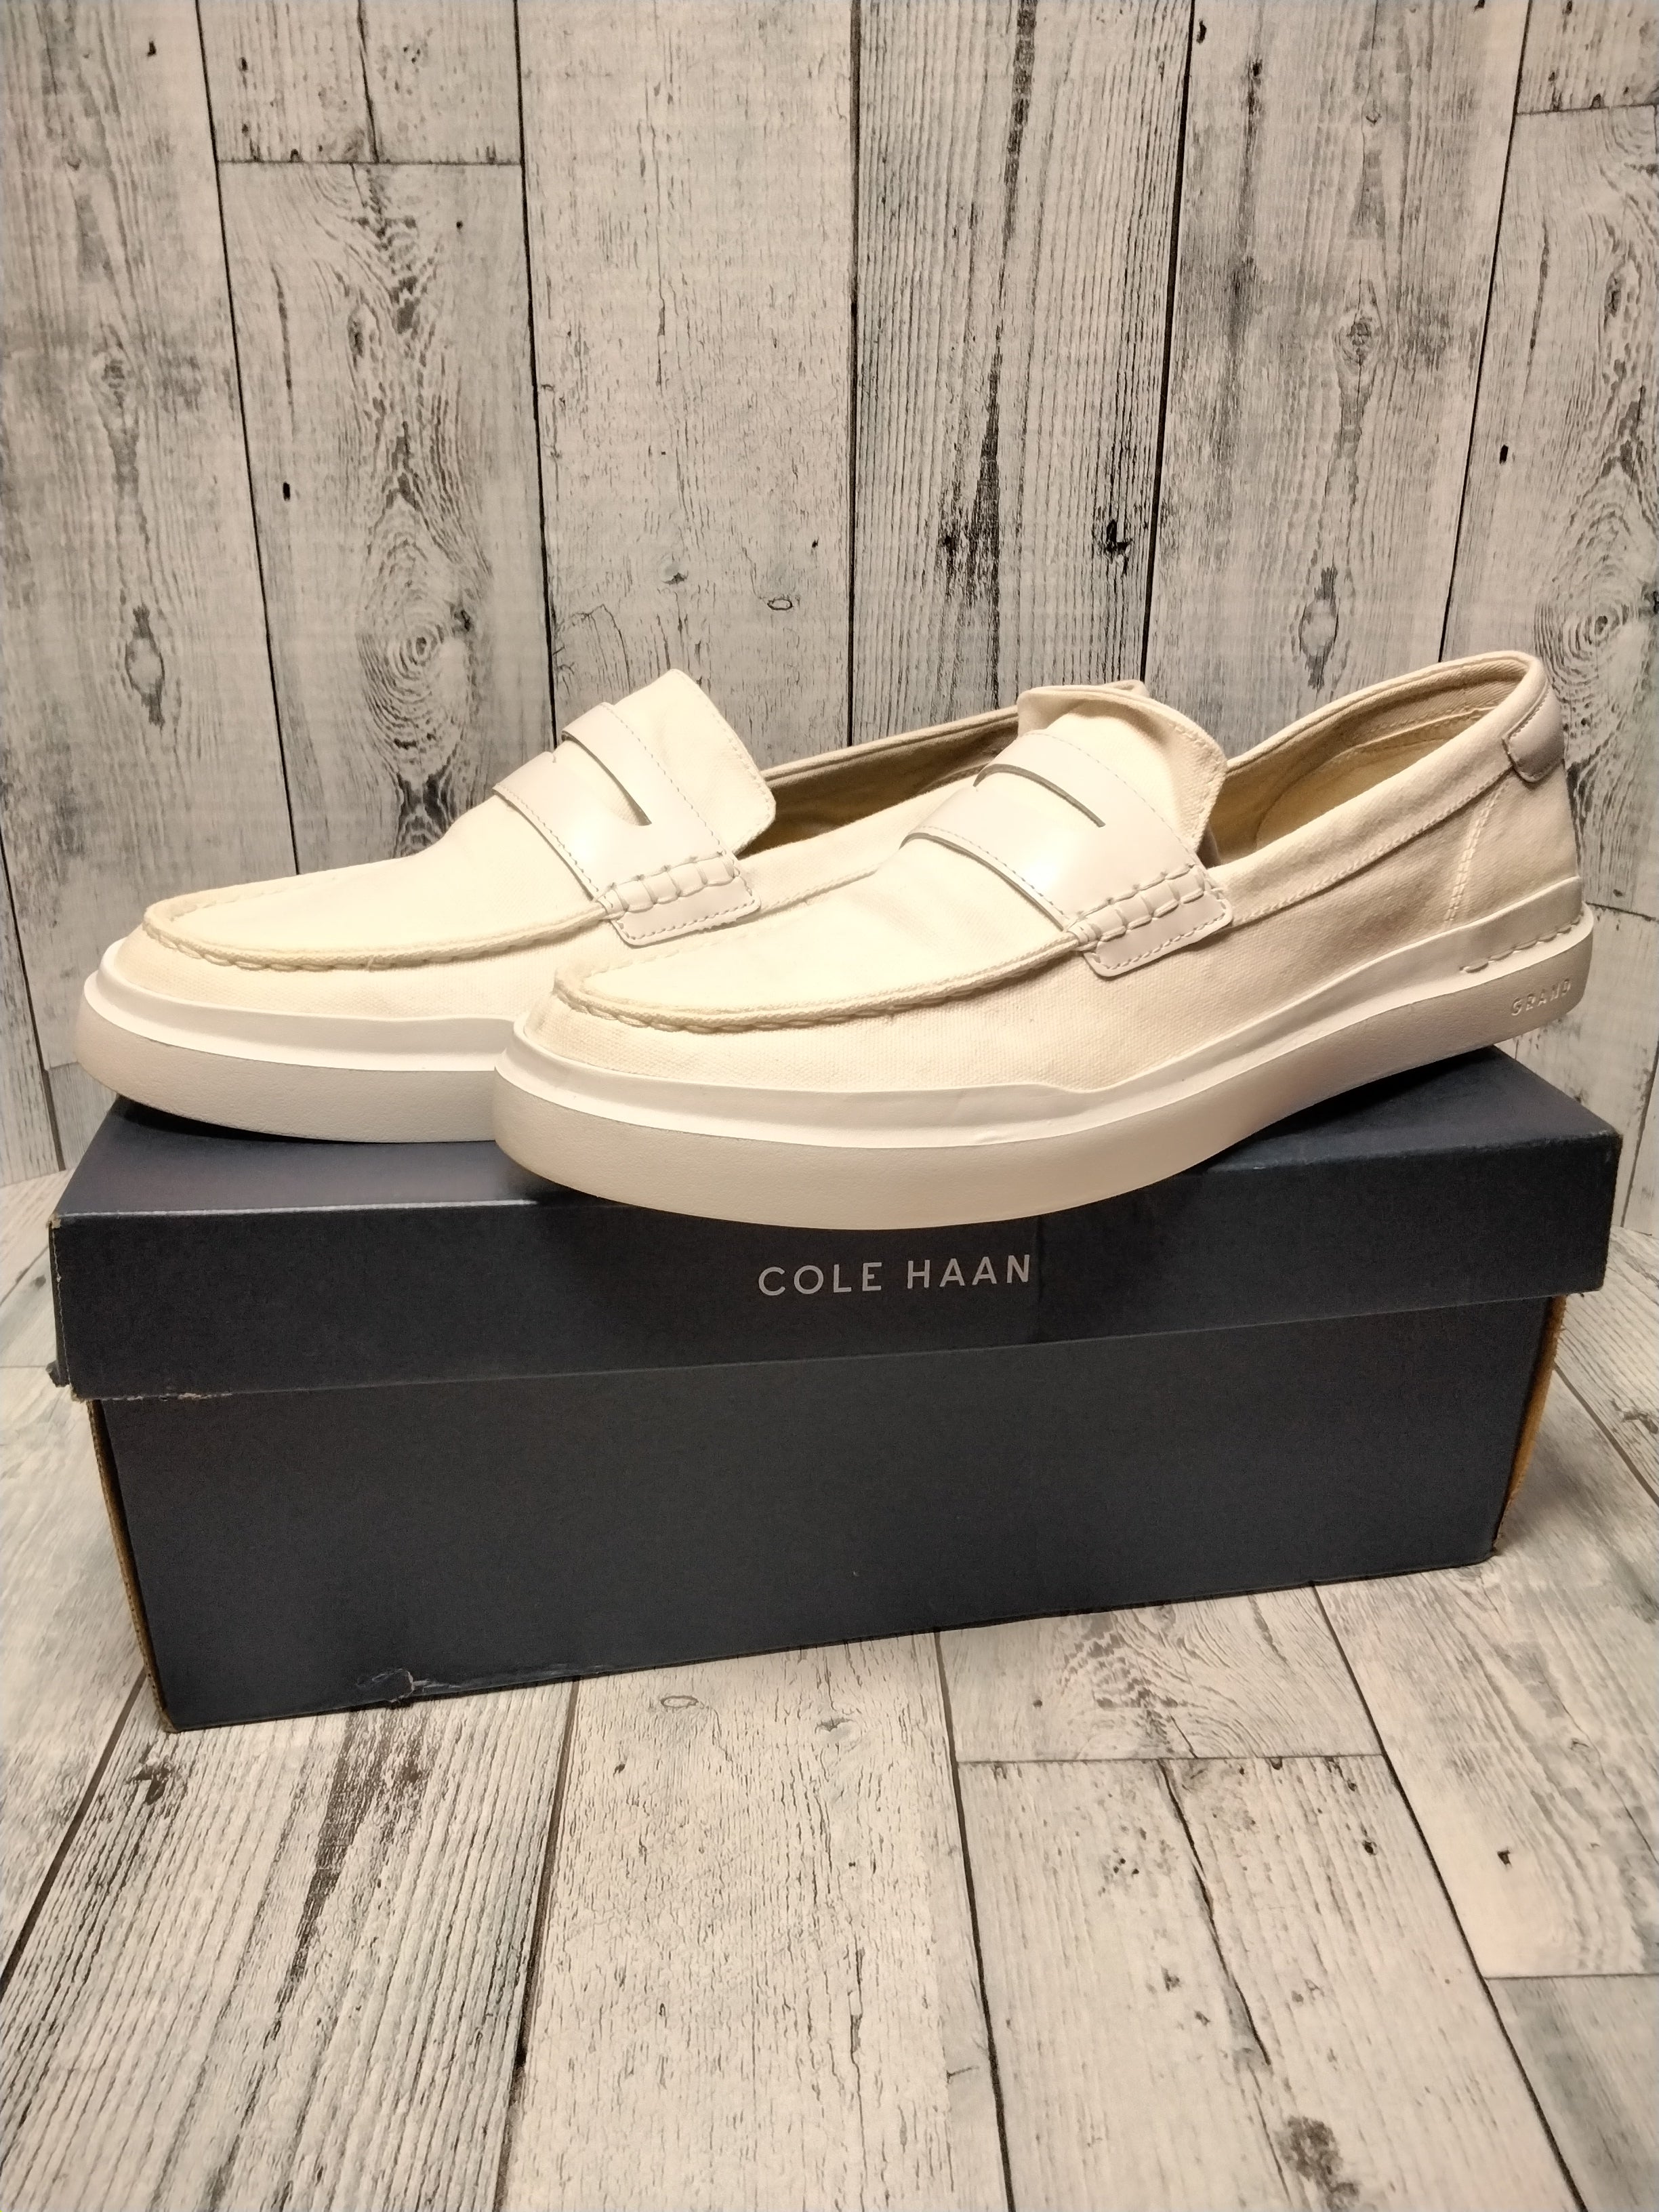 Cole Haan Men's Grandpro Rally Canvas Penny Loafer, White, Sz 13 (7782253134062)